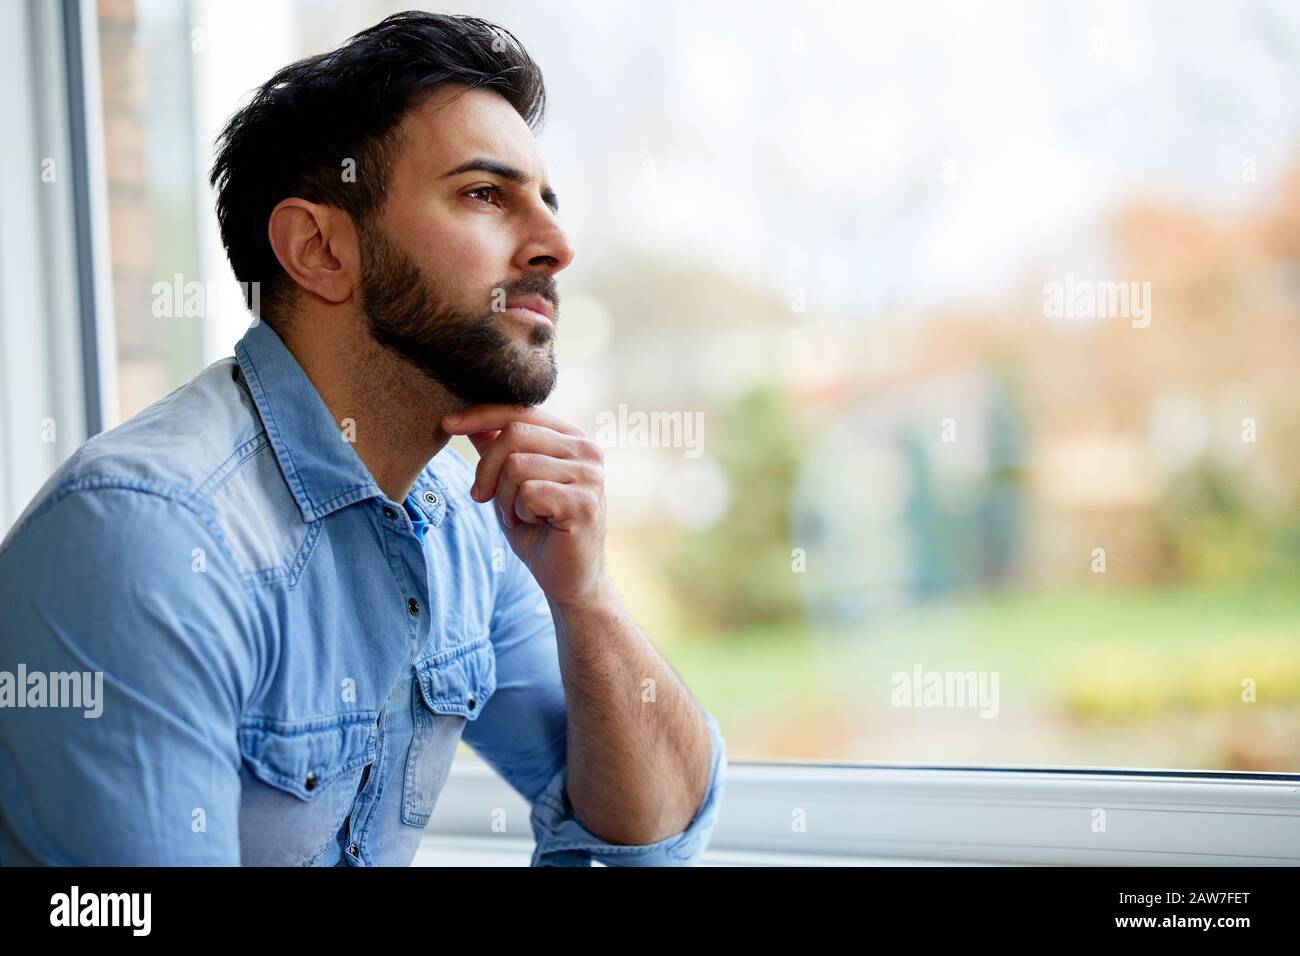 Man looking out of window Stock Photo